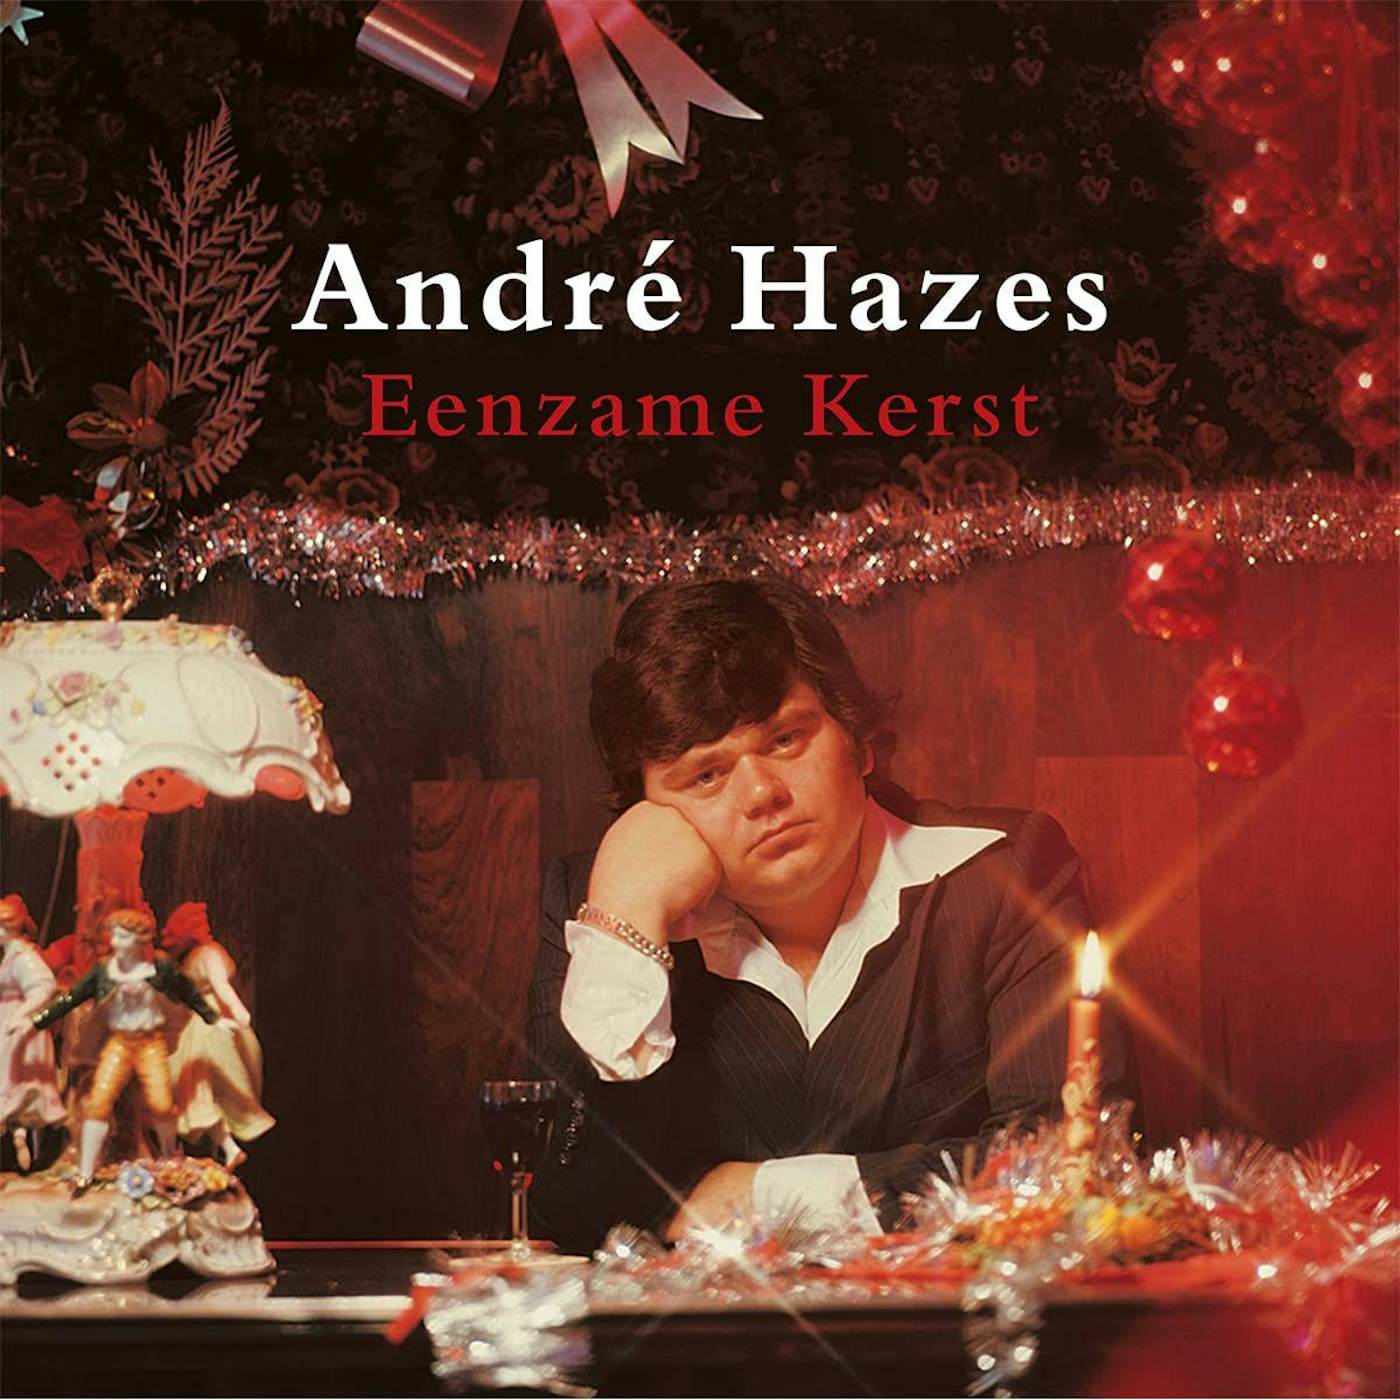 Andre Hazes EENZAME KERST (LIMITED/TRANSPARENT RED VINYL/180G/PLASTIC STICKER COVER/NUMBERED/IMPORT) Vinyl Record